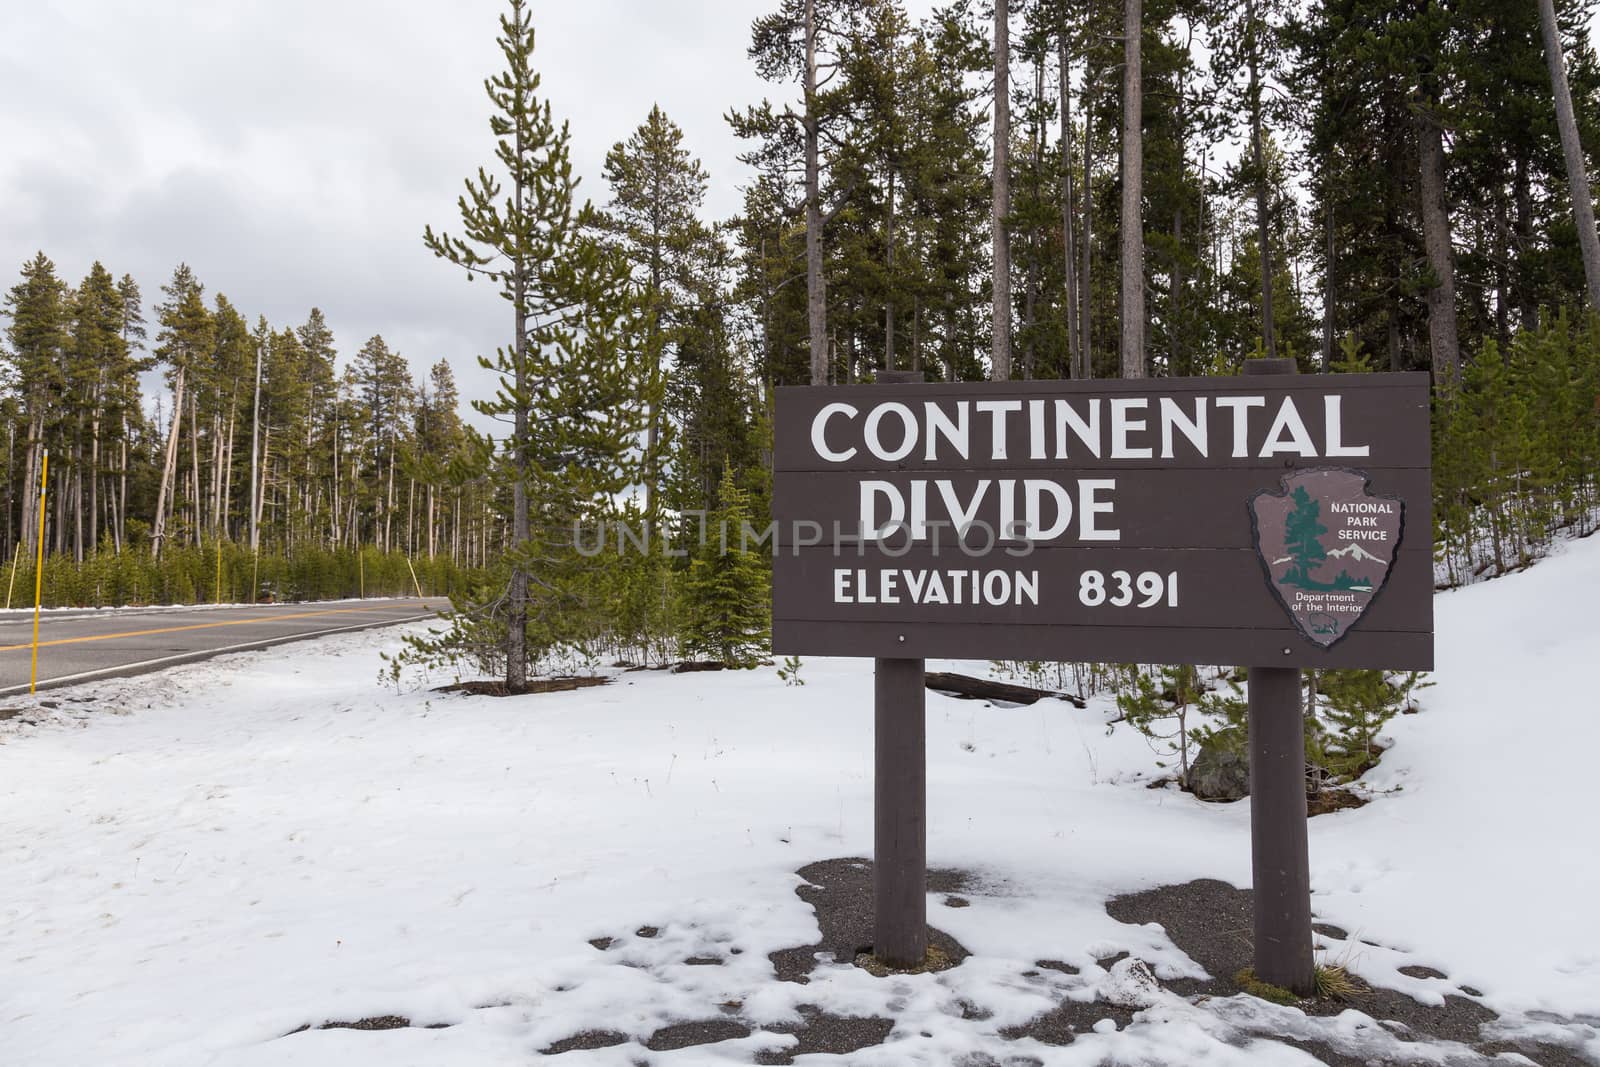 Sign marking the Continental Divide and an elevation of 8391.